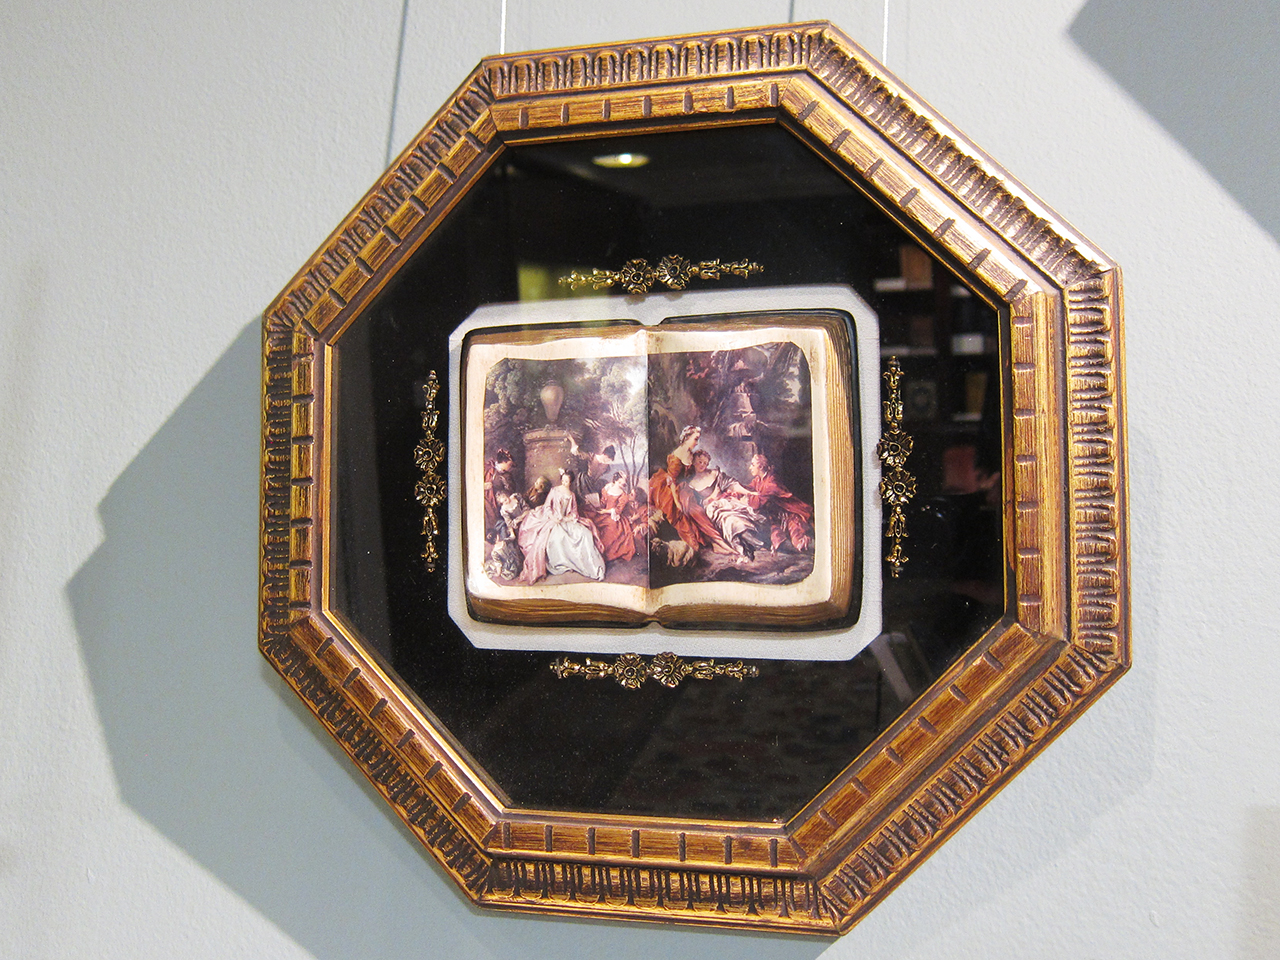 A framed faux box with three-dimensional open books showing decoupage images of famosu European paintings (mid-20th c.) 